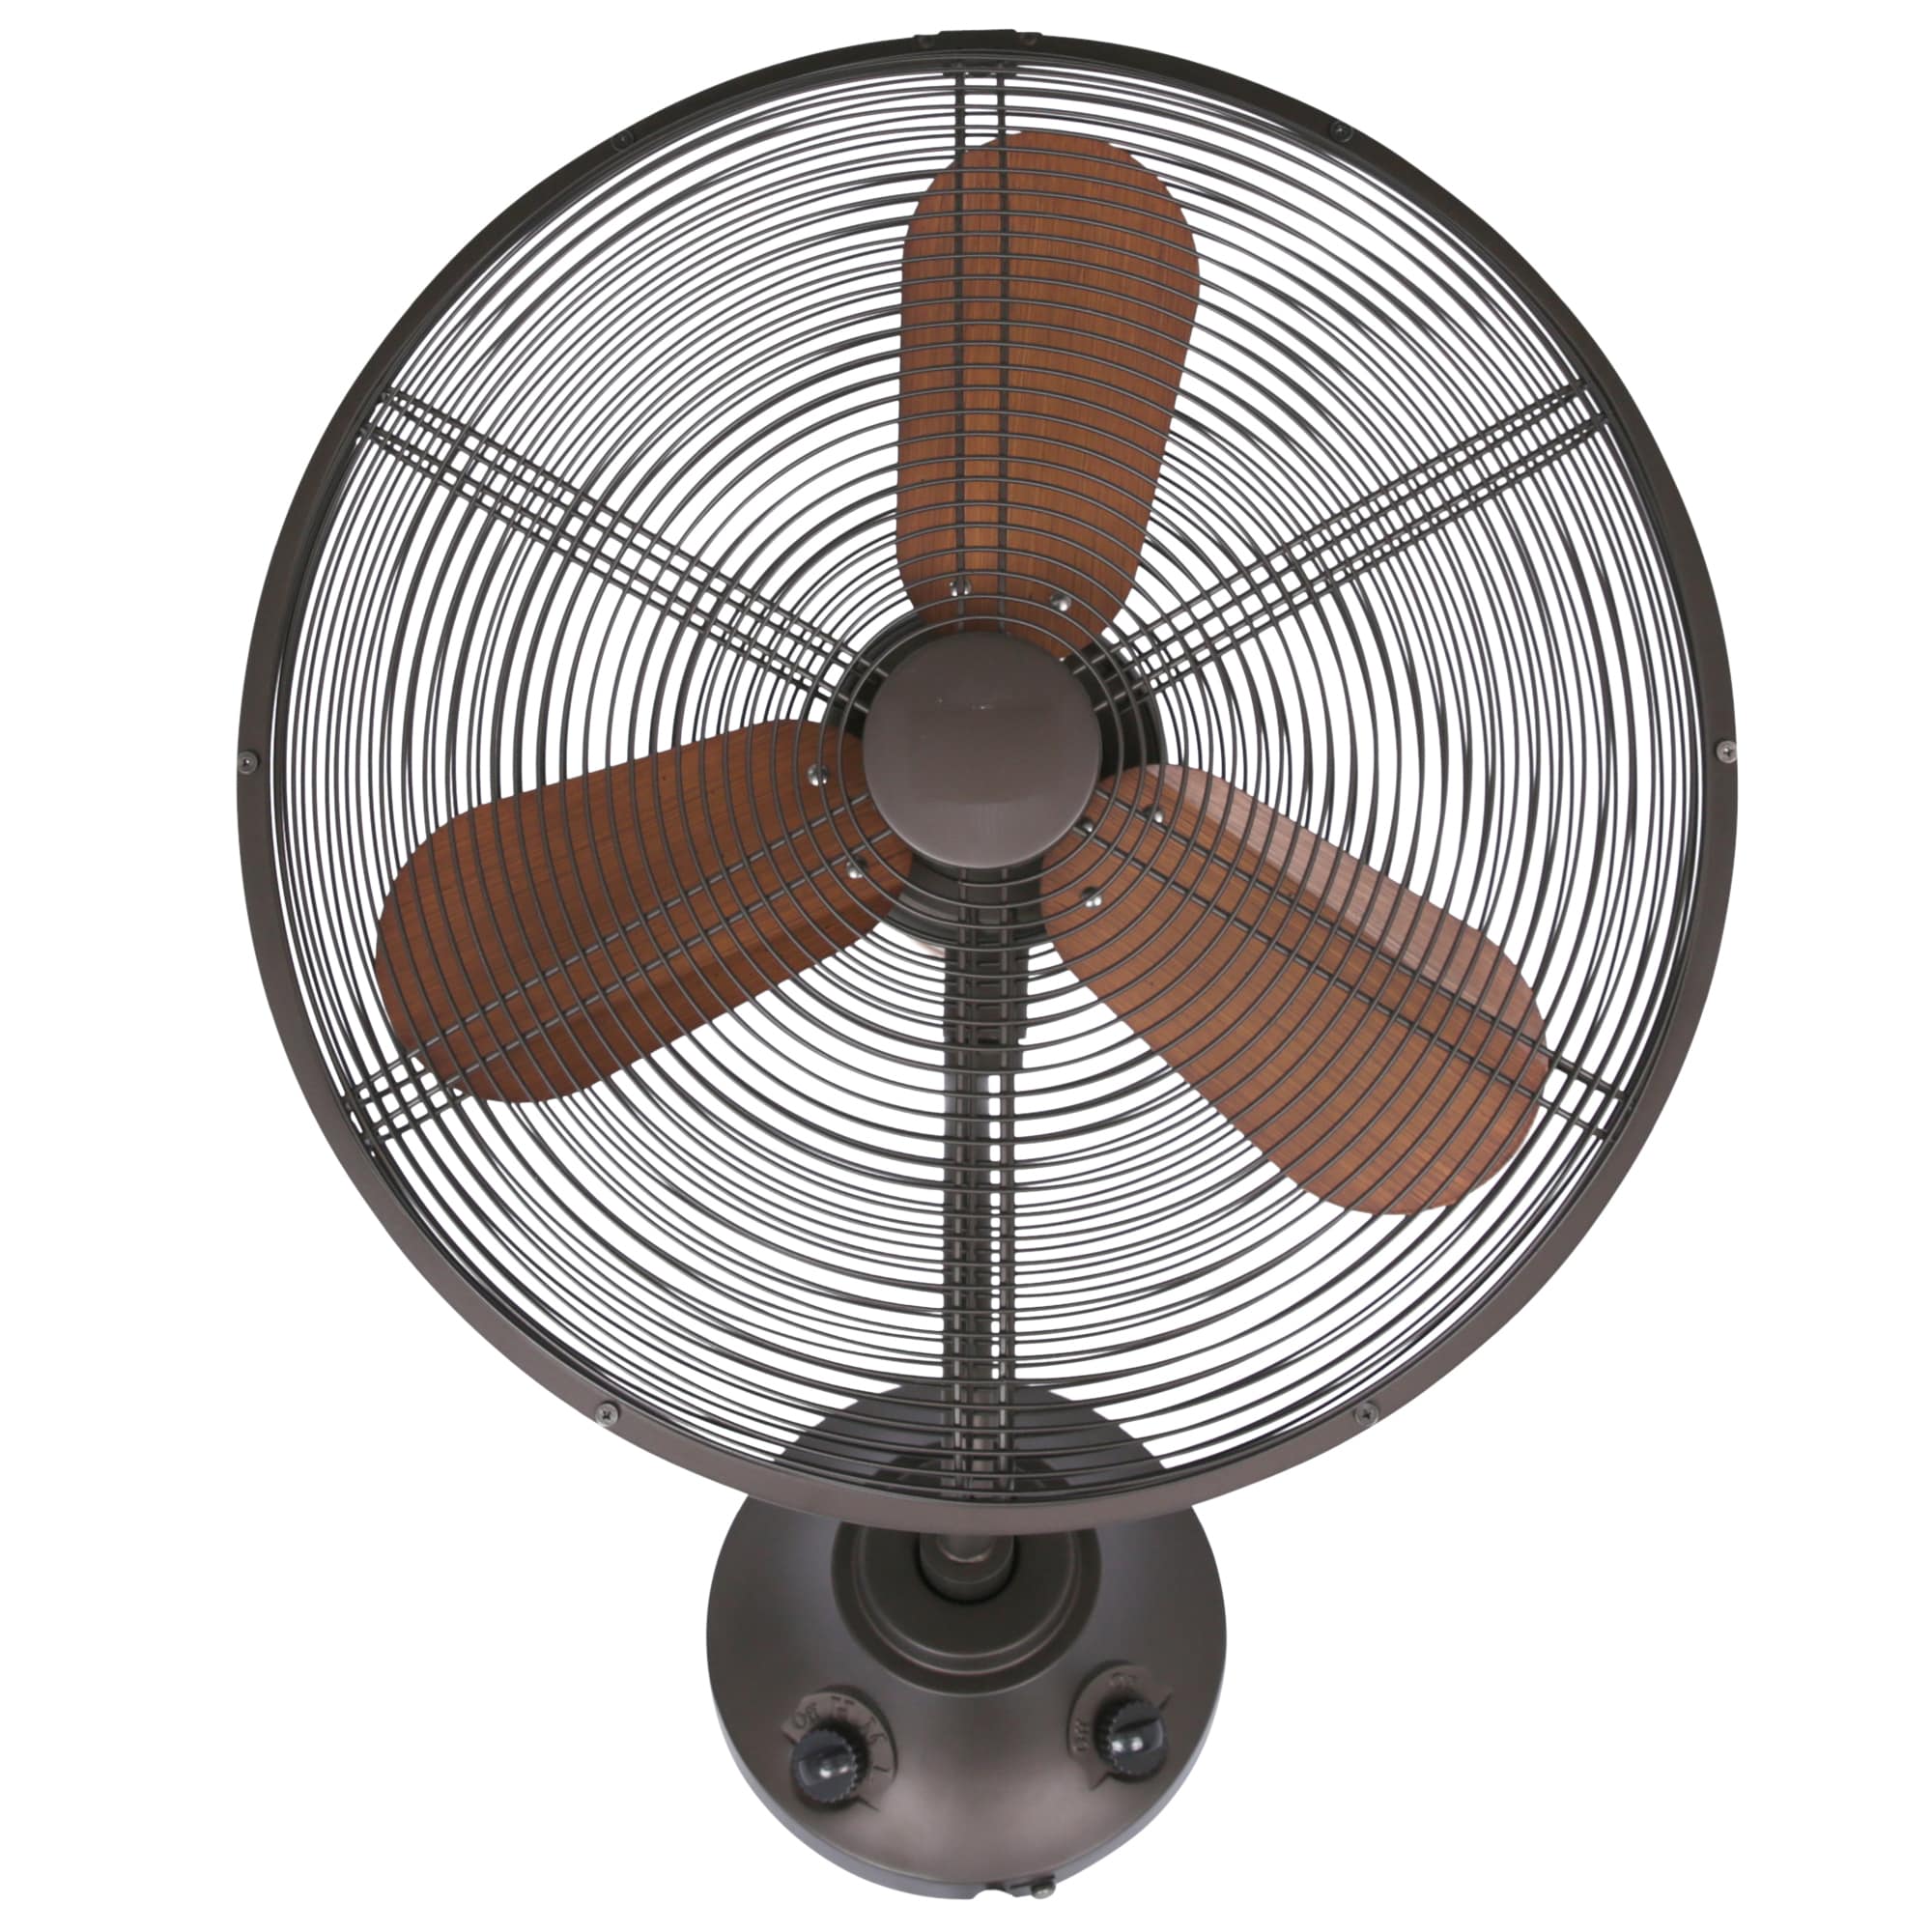 Wall Mount Fan Oscillating 18 Inch 3 Speed Indoor Outdoor With Remote Control